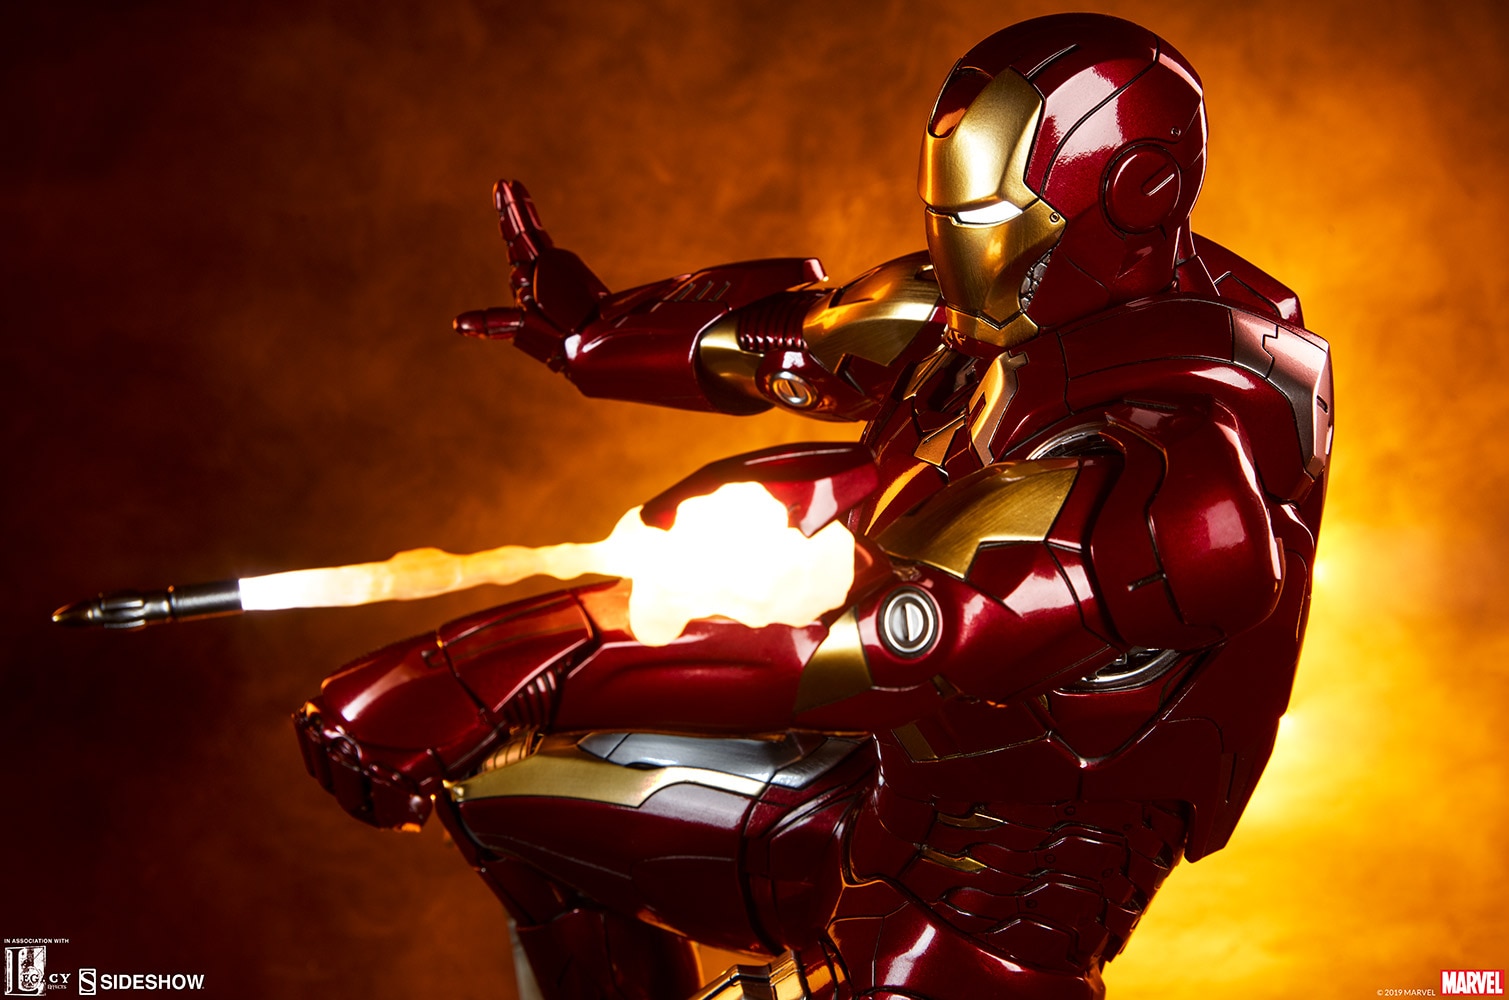 Sideshow Iron Man Mark VII Maquette Statue Photos & Order Info! - Marvel Toy News